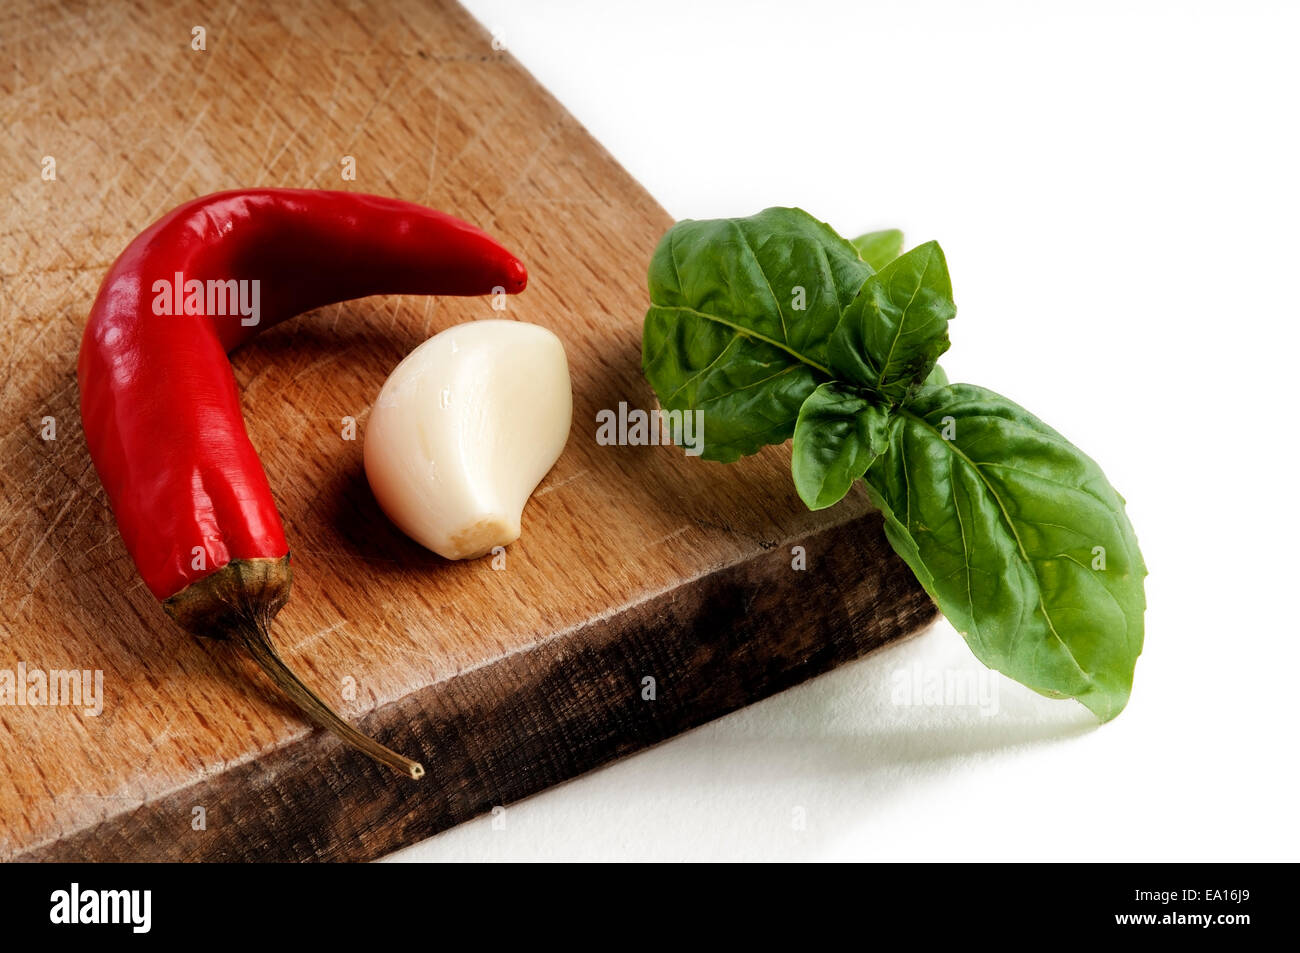 Spices widely used to flavor Mediterranean cuisine Stock Photo